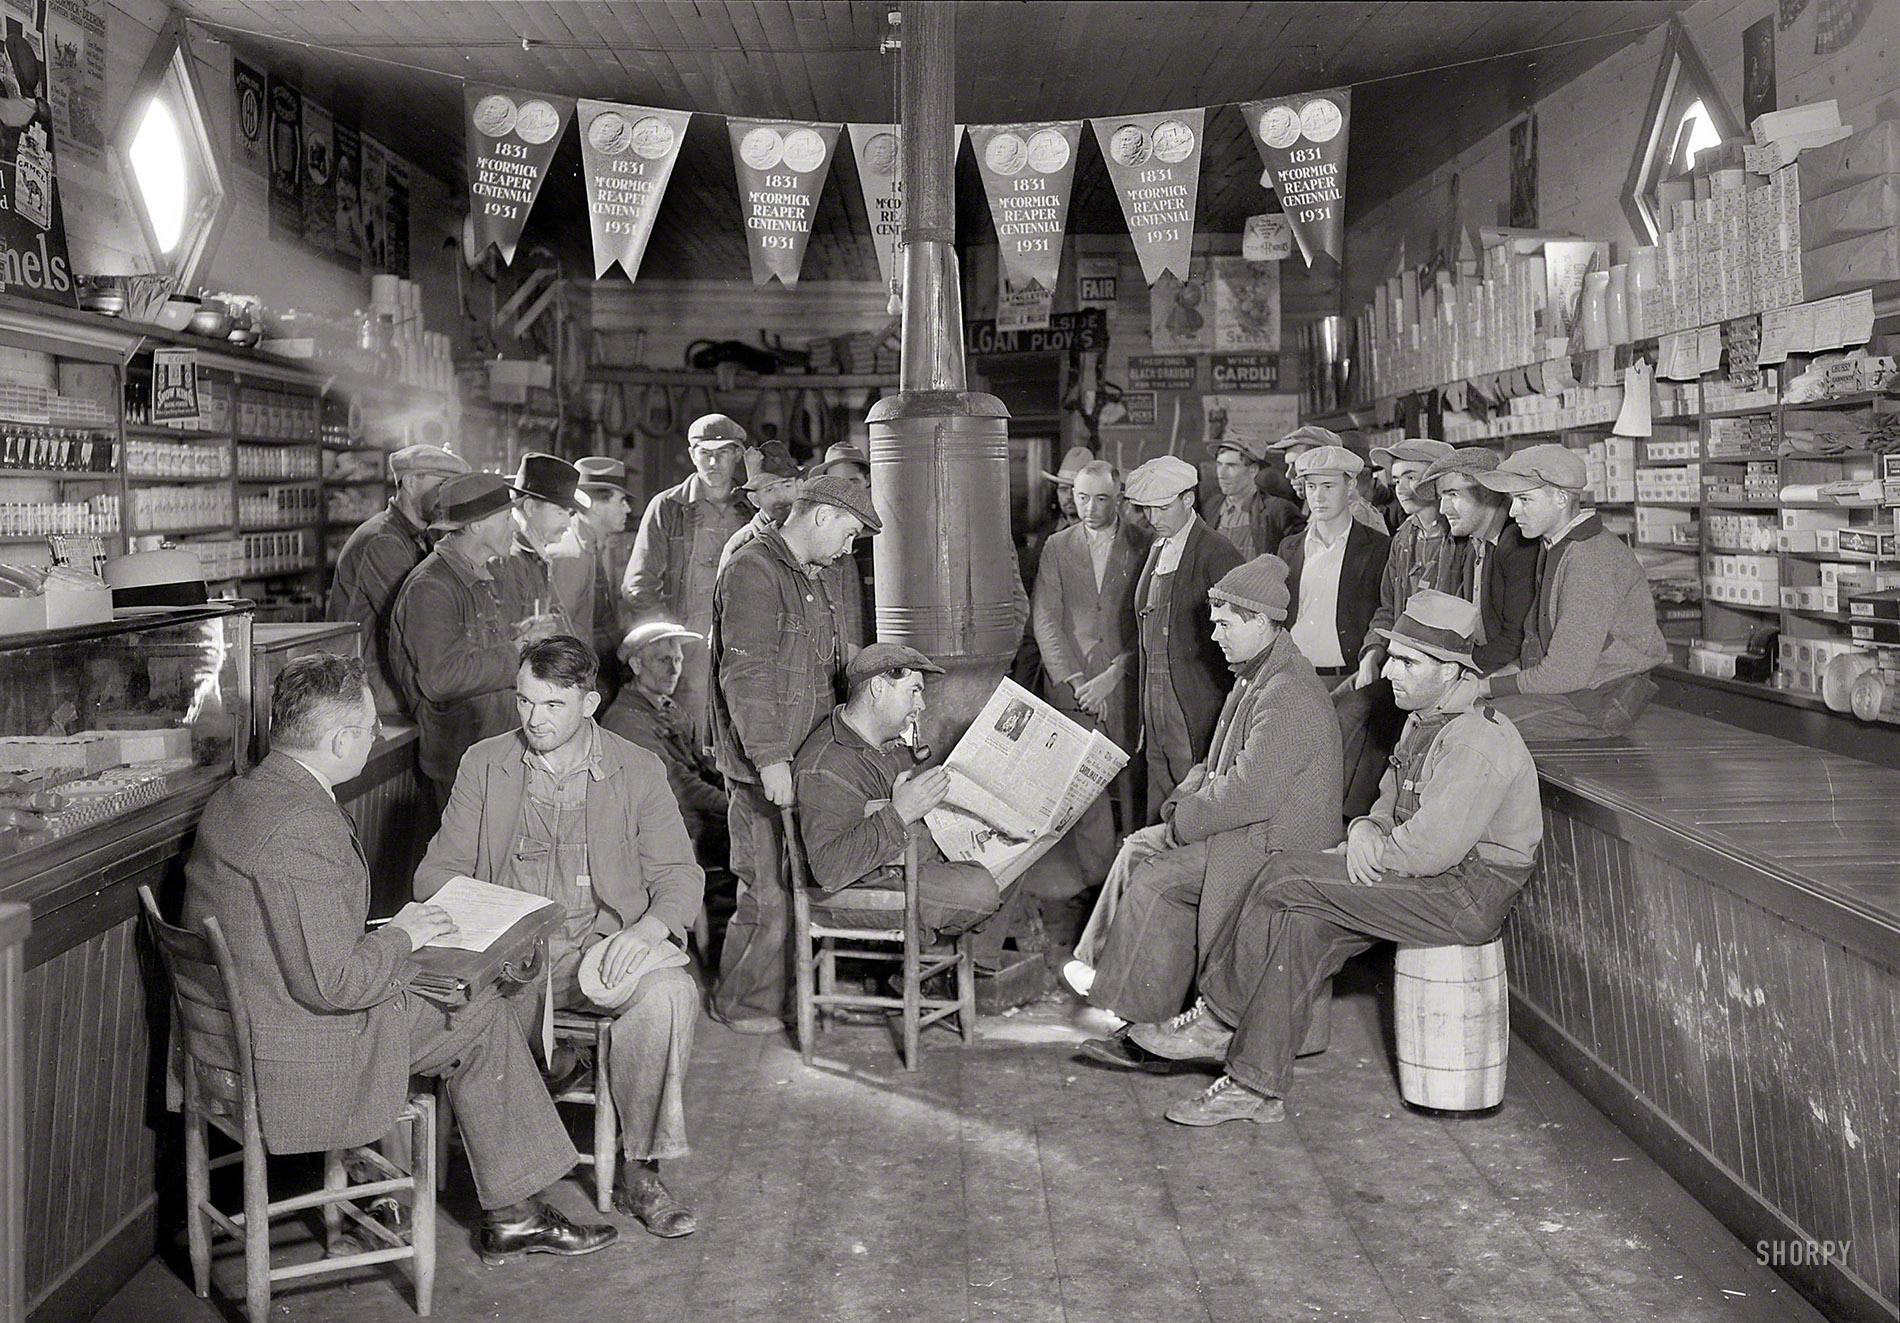 November 1933. "E.H. Elam making interviews at Stiner's Store, Lead Mine Bend, Tenn. Selections for employment with the TVA are made on the basis of ability and efficiency." The vast hydroelectric and flood control project overseen by the Tennessee Valley Authority was one of the New Deal programs enacted under the Roosevelt Administration. Photo by Lewis Hine. View full size.